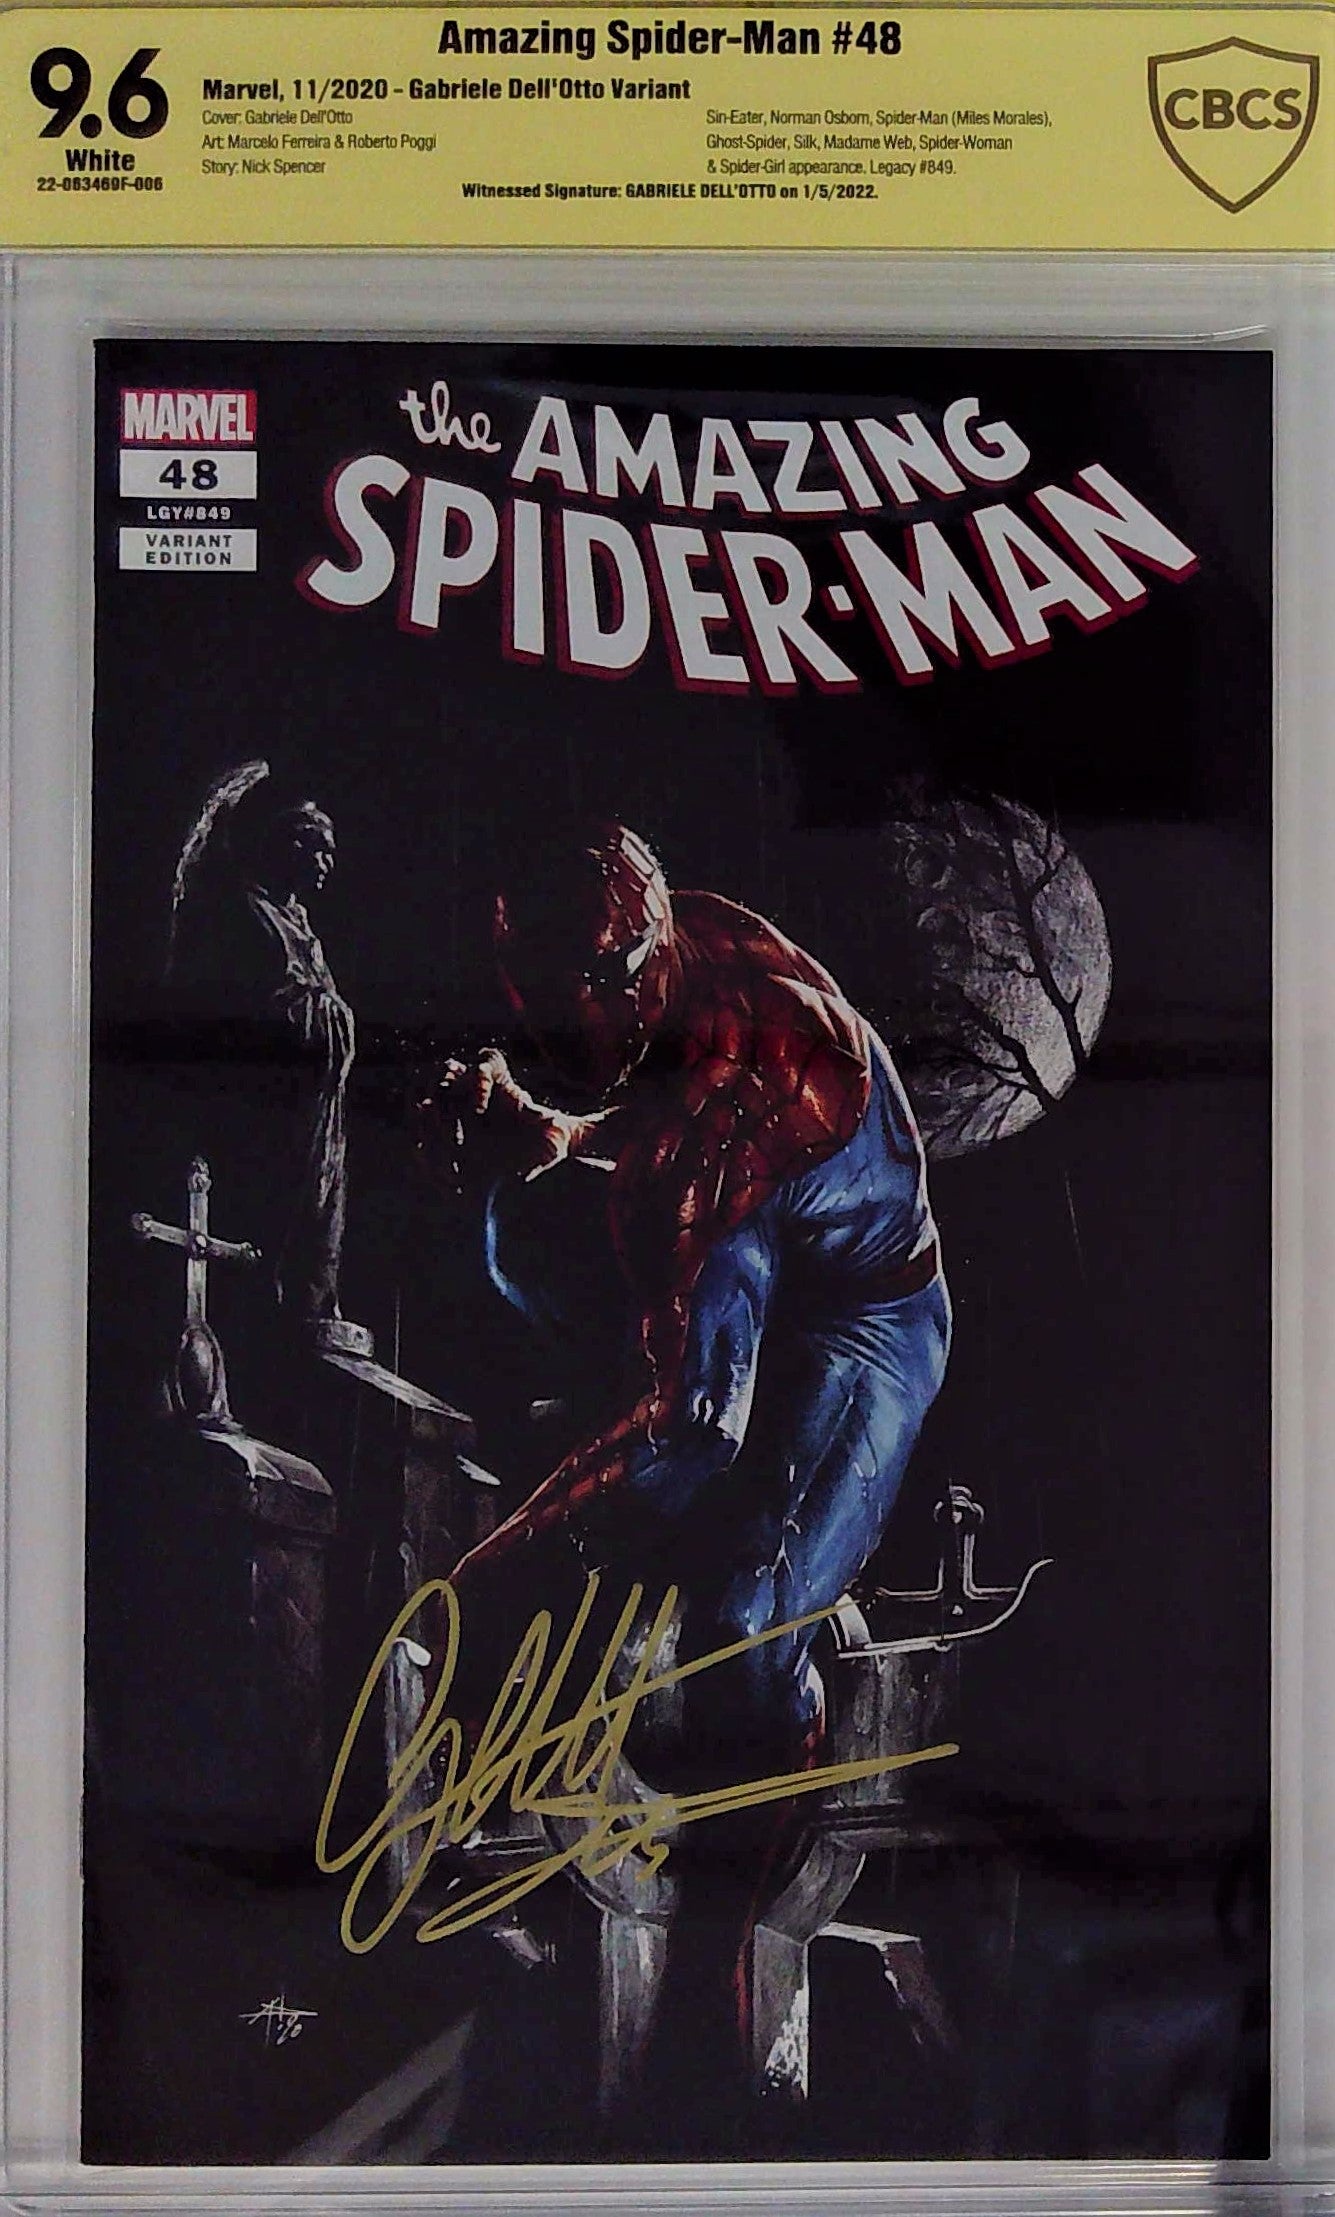 Amazing Spider-Man #48 Gabriele Dell'Otto Variant CBCS 9.6 Yellow Label